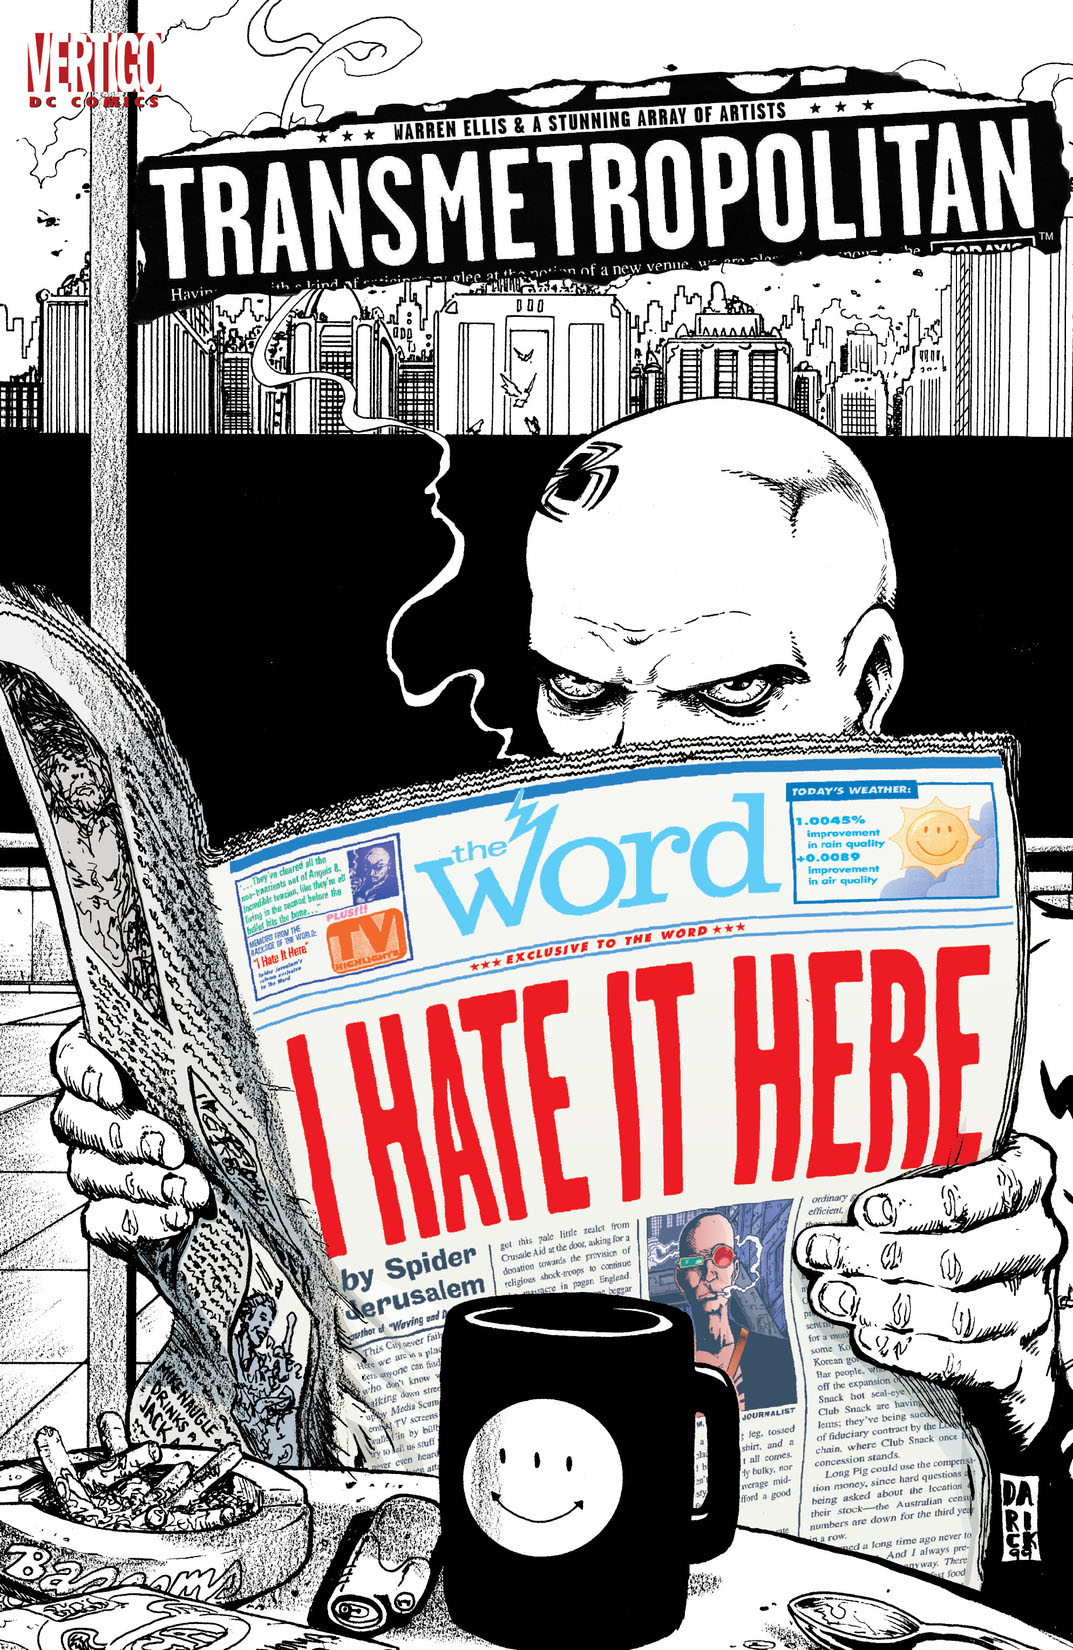 Transmetropolitan: I Hate It Here #1 preview images